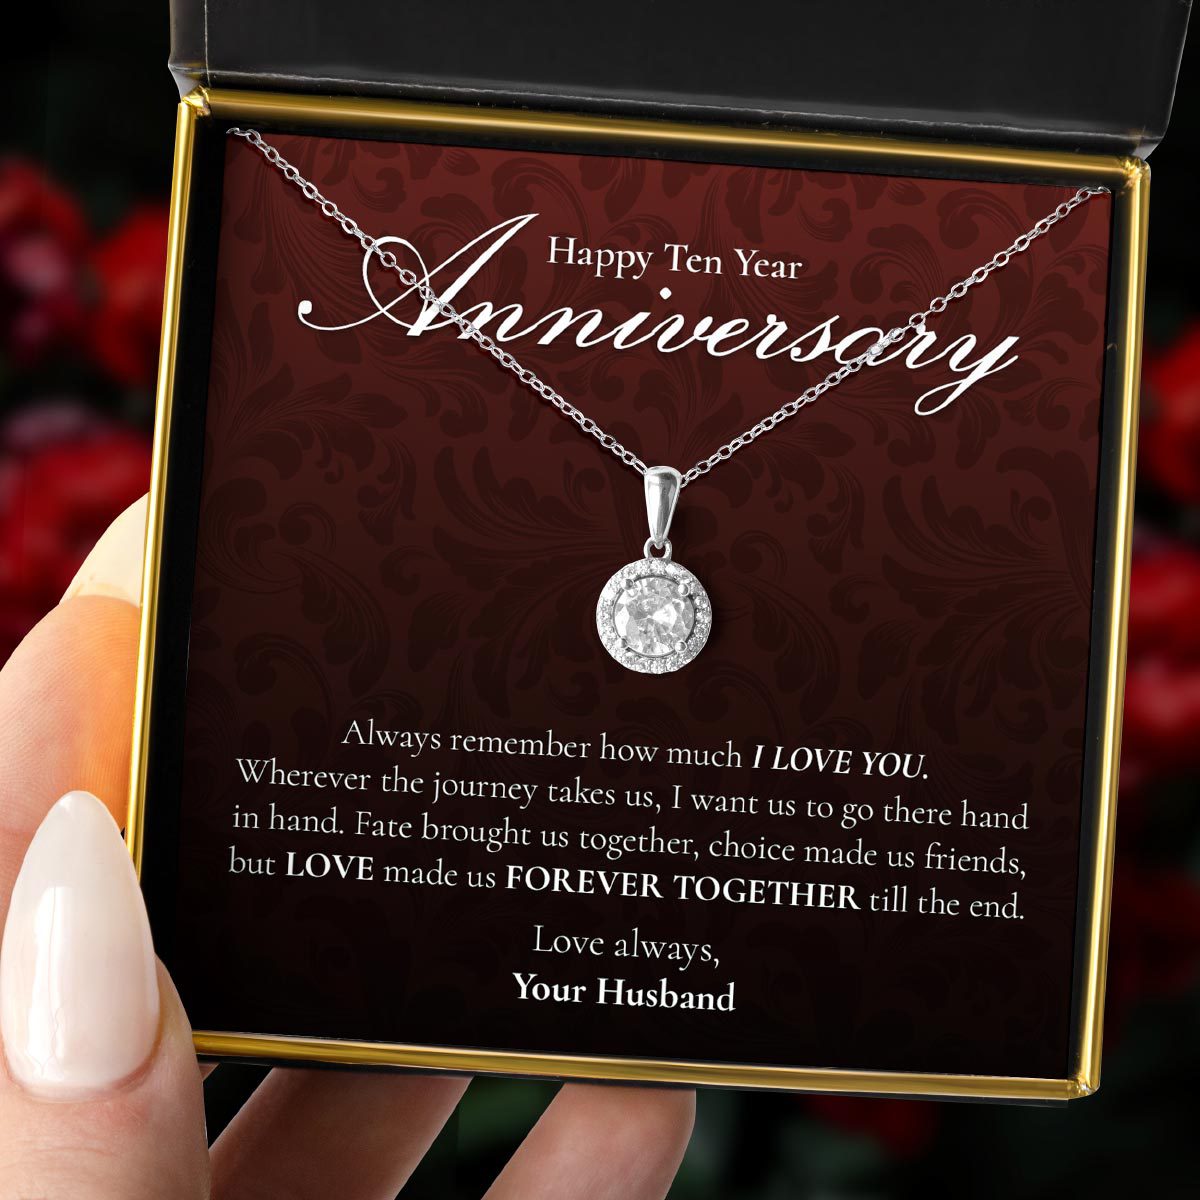 Happy Ten Year Anniversary - Classique Sterling Silver Halo Pendant Necklace Gift Set